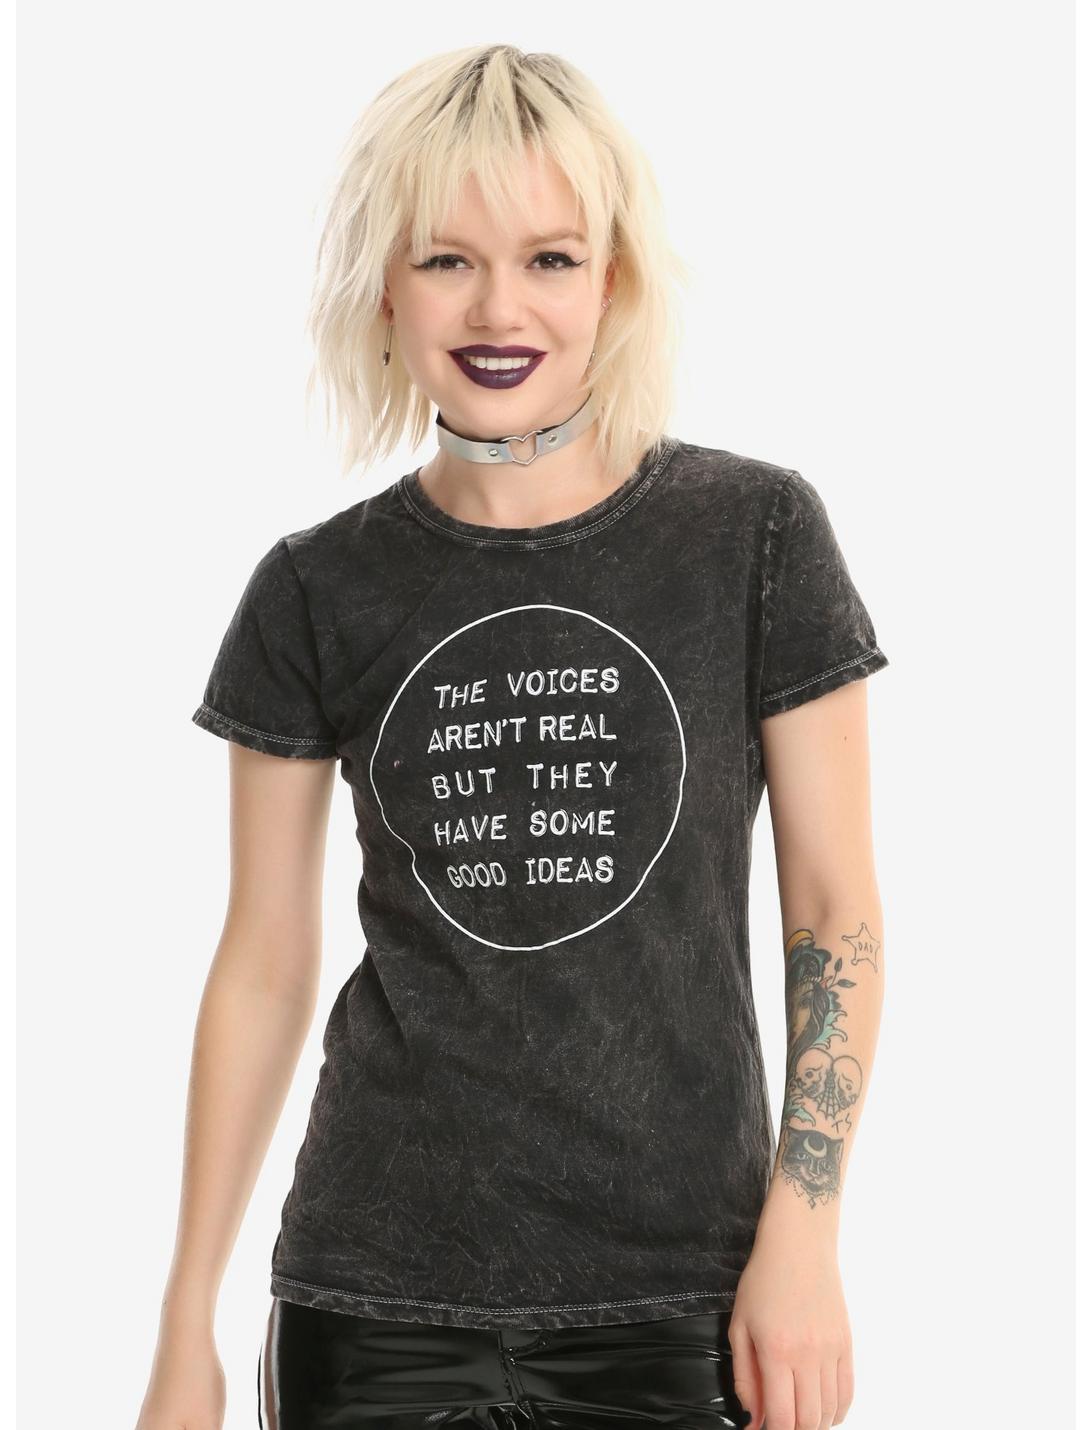 The Voices Aren't Real Girls T-Shirt, BLACK, hi-res